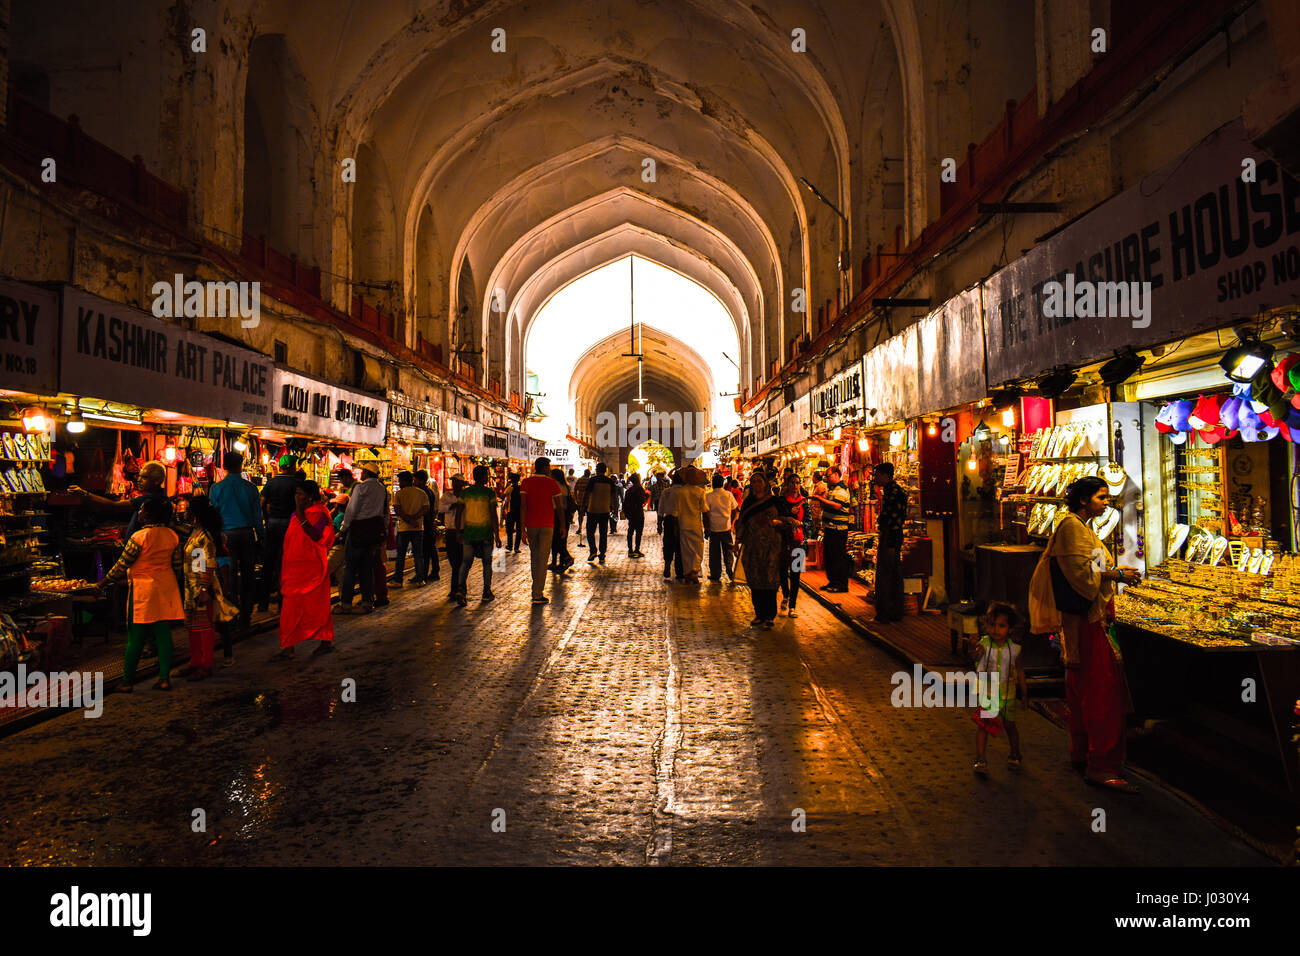 meena bazar - a market in the entrace of red fort in chandani chowk, it is known for selling handicraft works from local people. Stock Photo